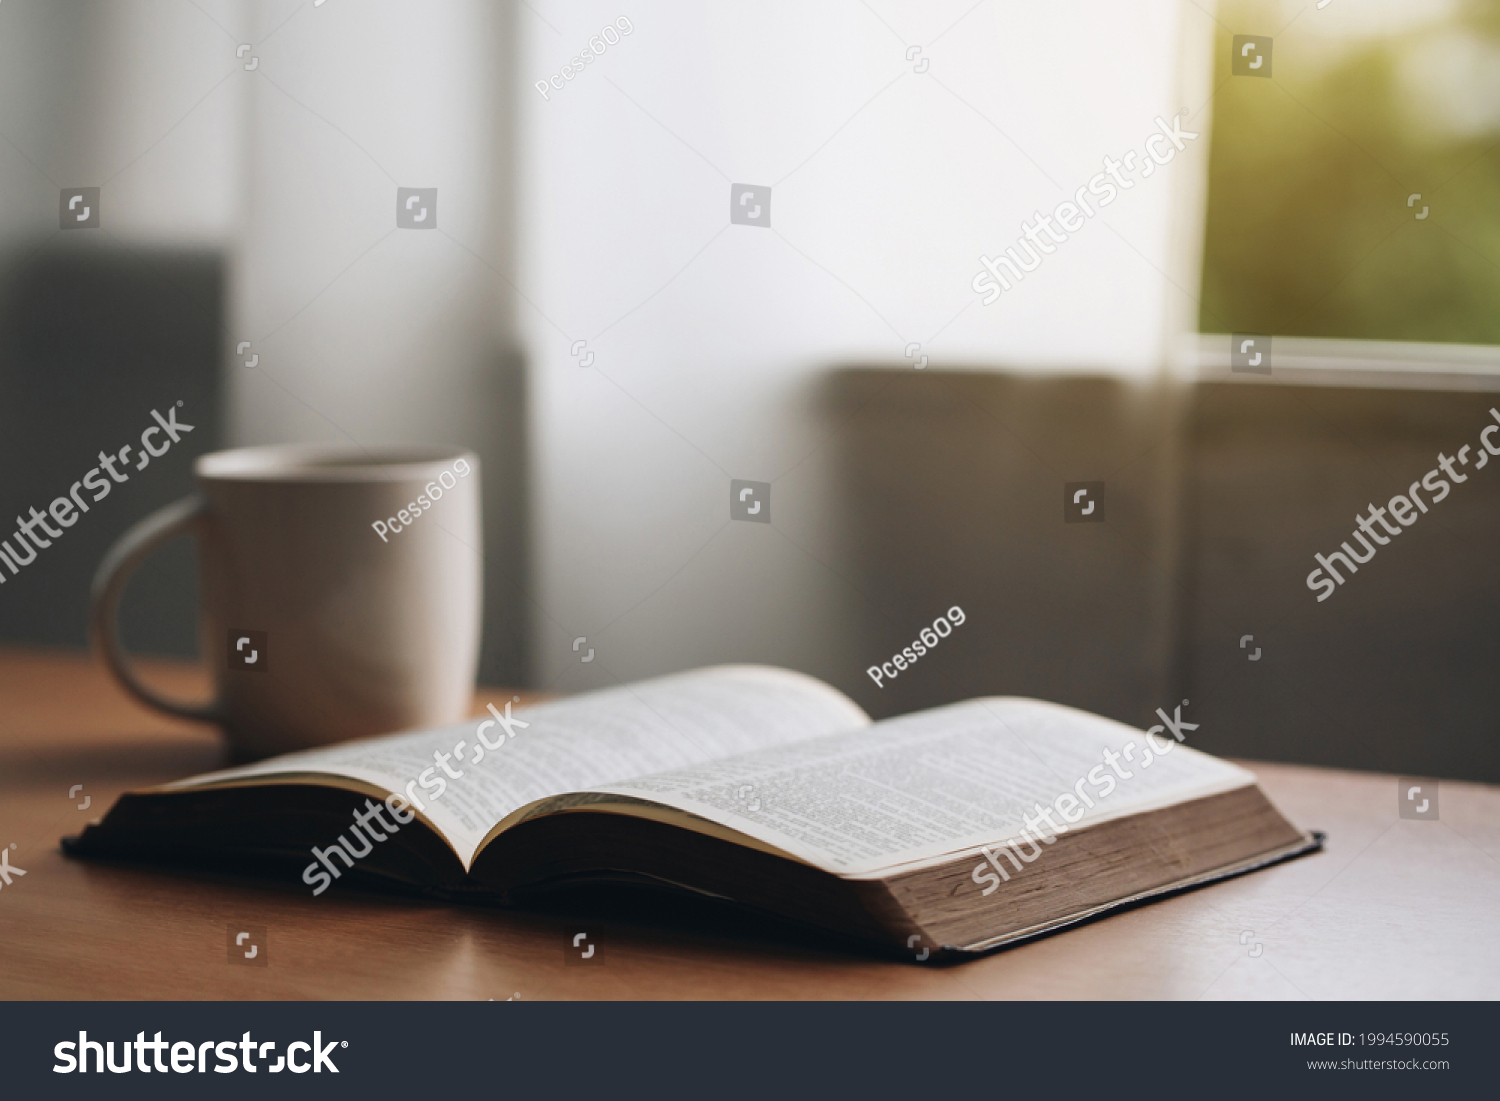 Open bible with a cup of coffee for morning devotion on wooden table with window light.book and coffee cup on wooden table. #1994590055